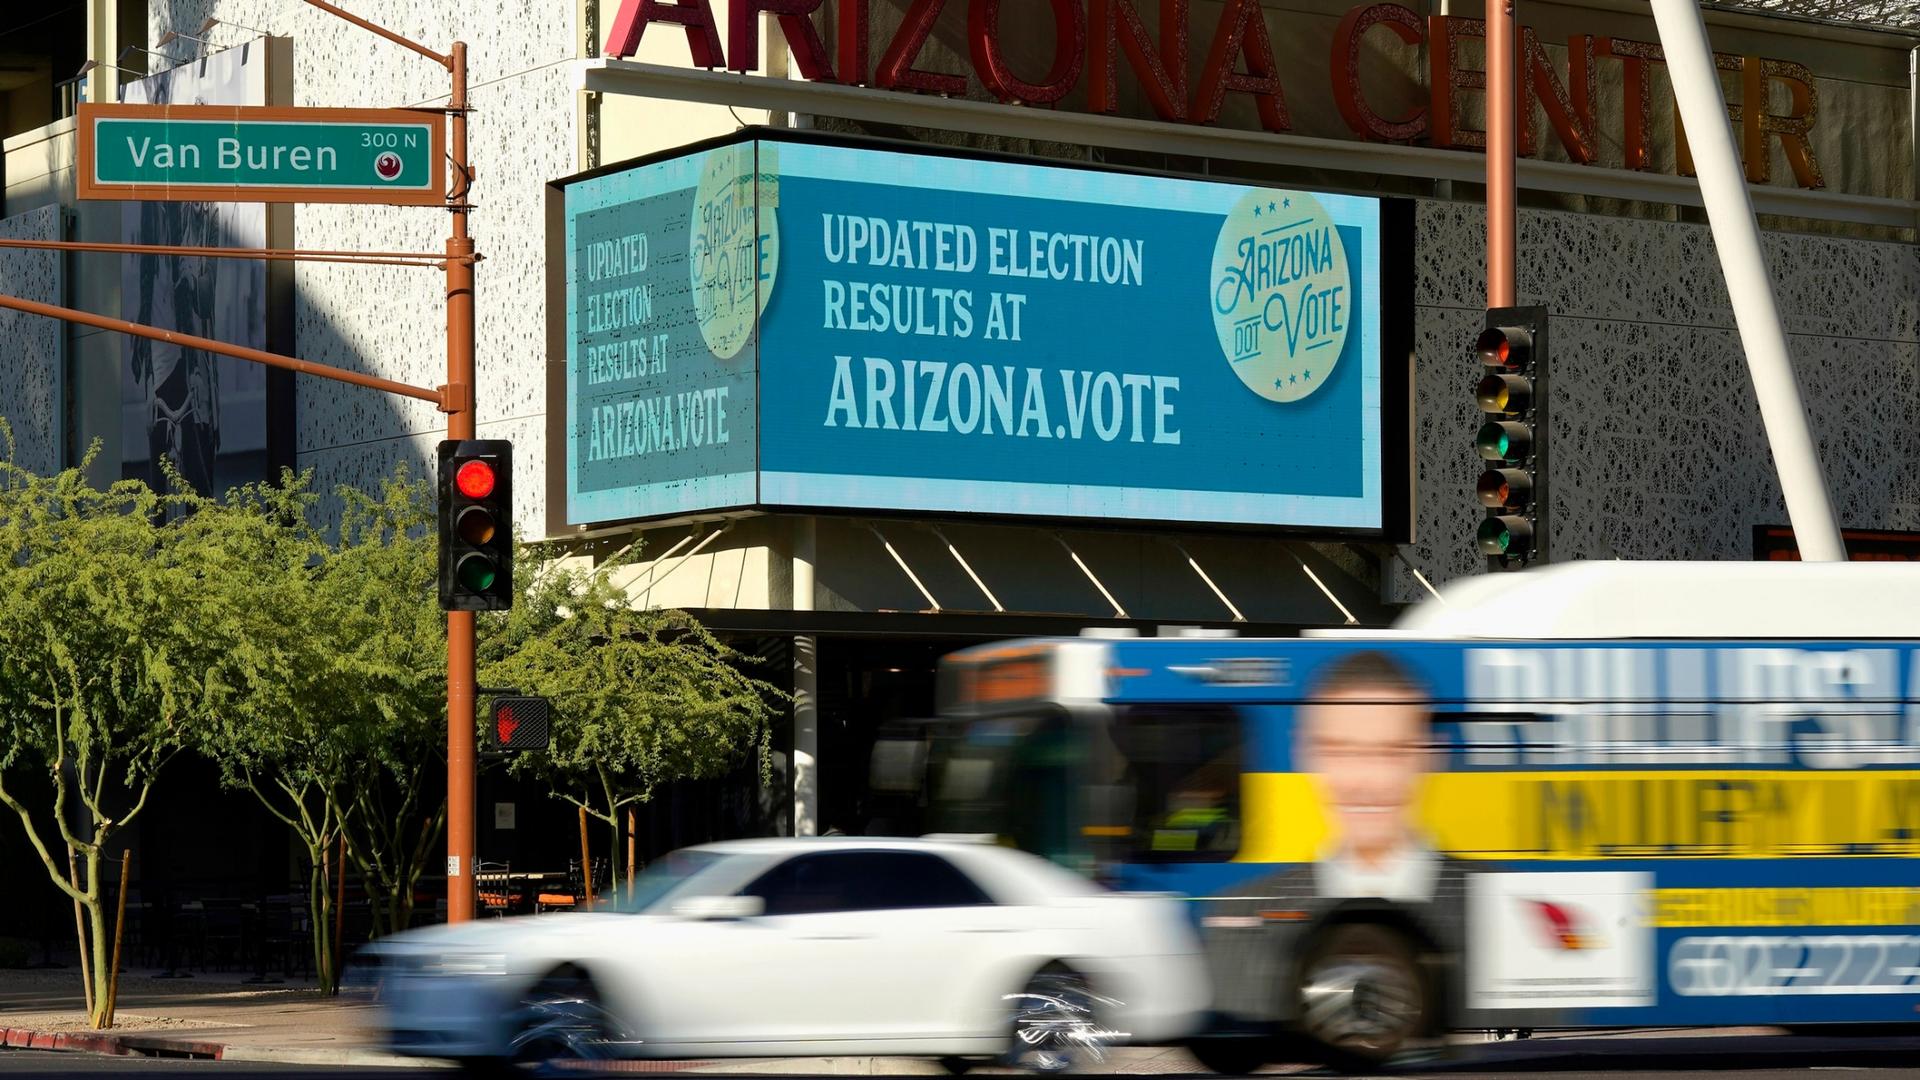 An electonic billboard is shown with information about the Arizona vote as vehicles pass by.